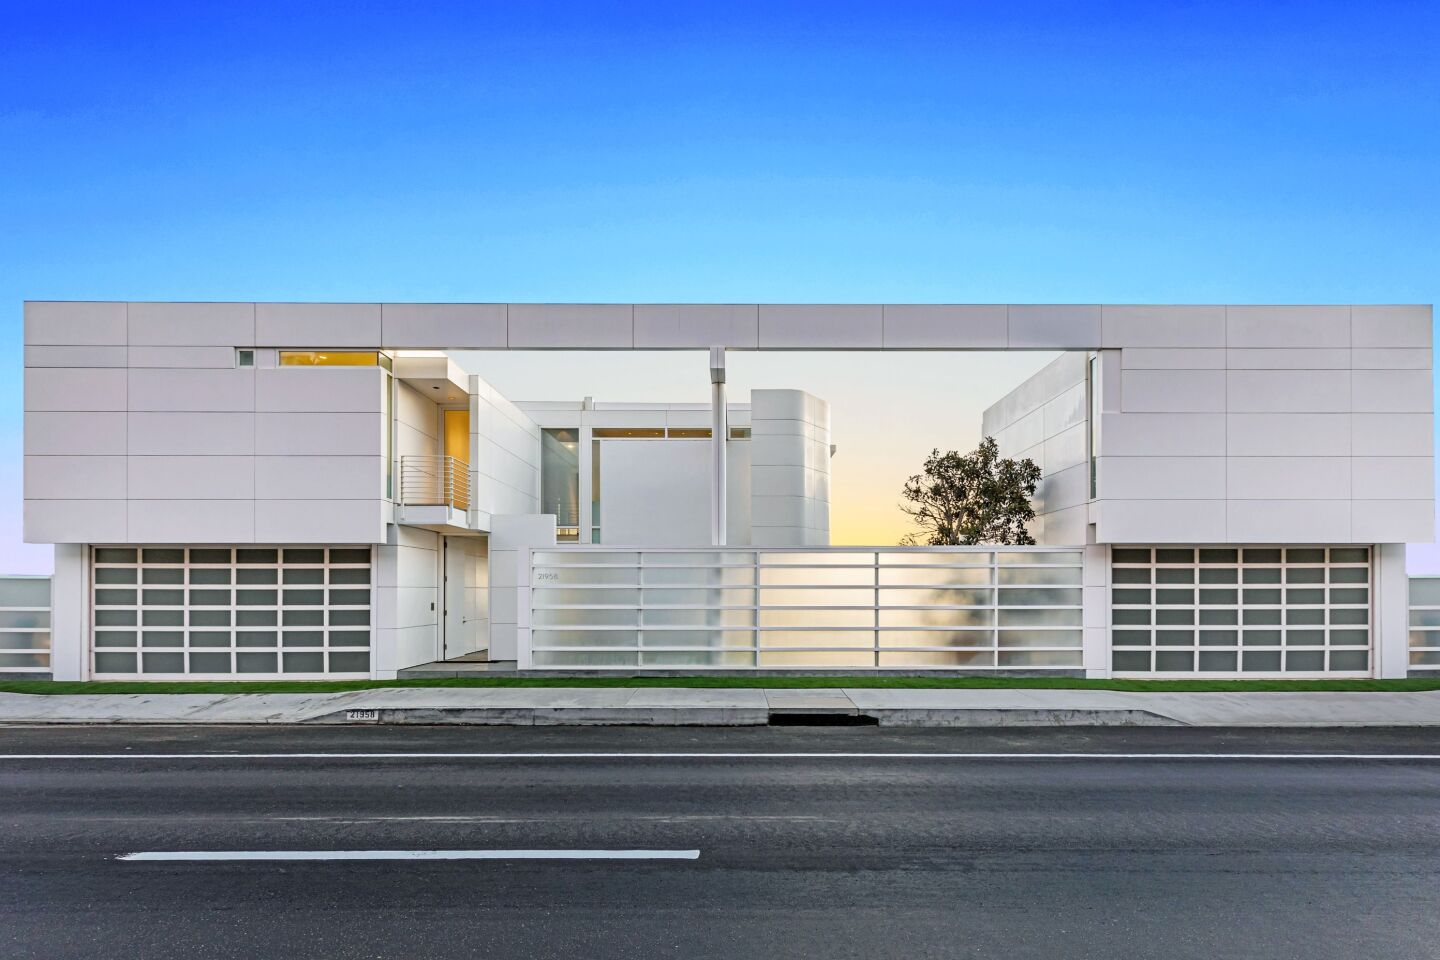 The white, modular exterior of the home is seen from the road.